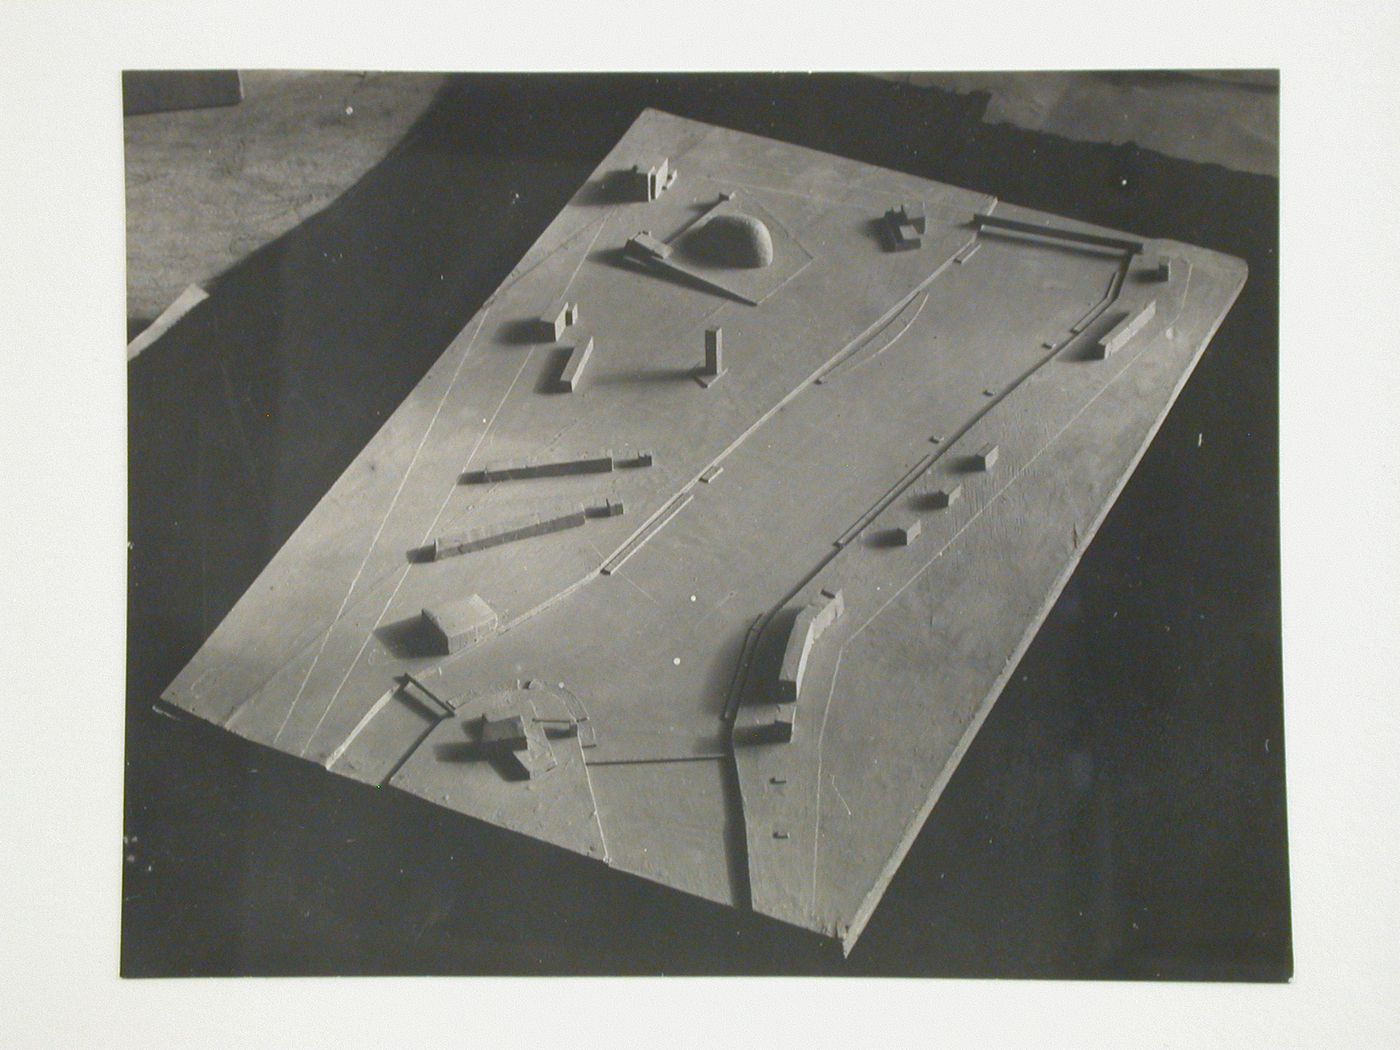 Photograph of a site model for an All-Union Palace of the Arts, Moscow